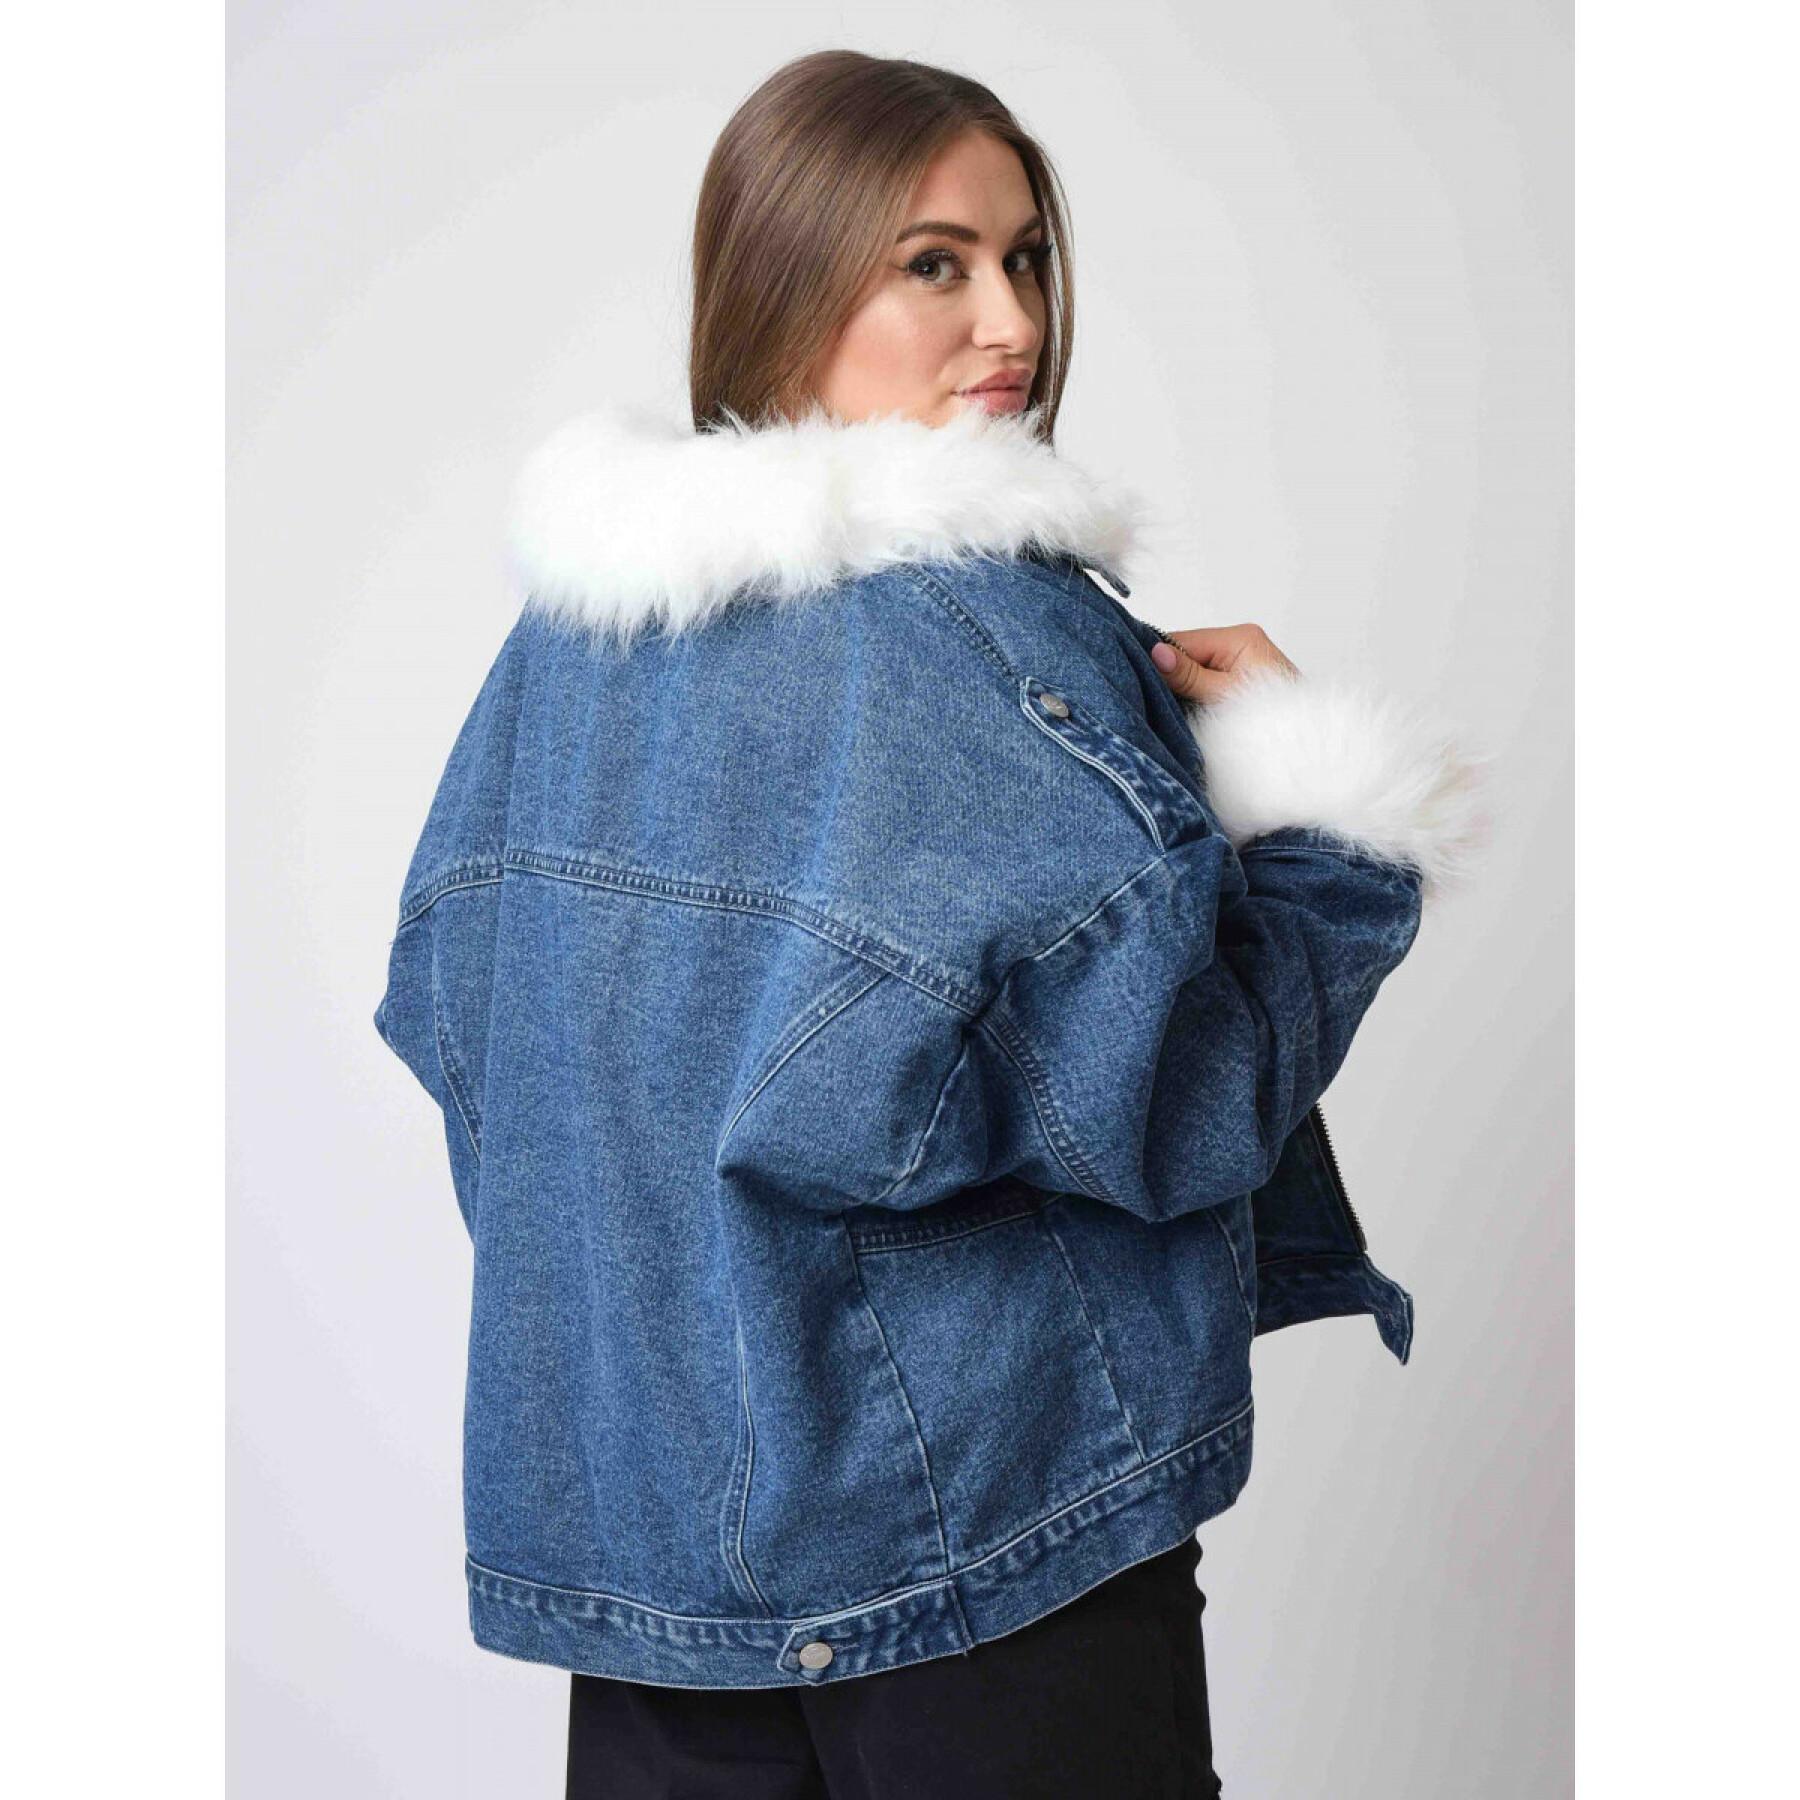 Denim jacket with fur effect on sleeves and collar Project X Paris